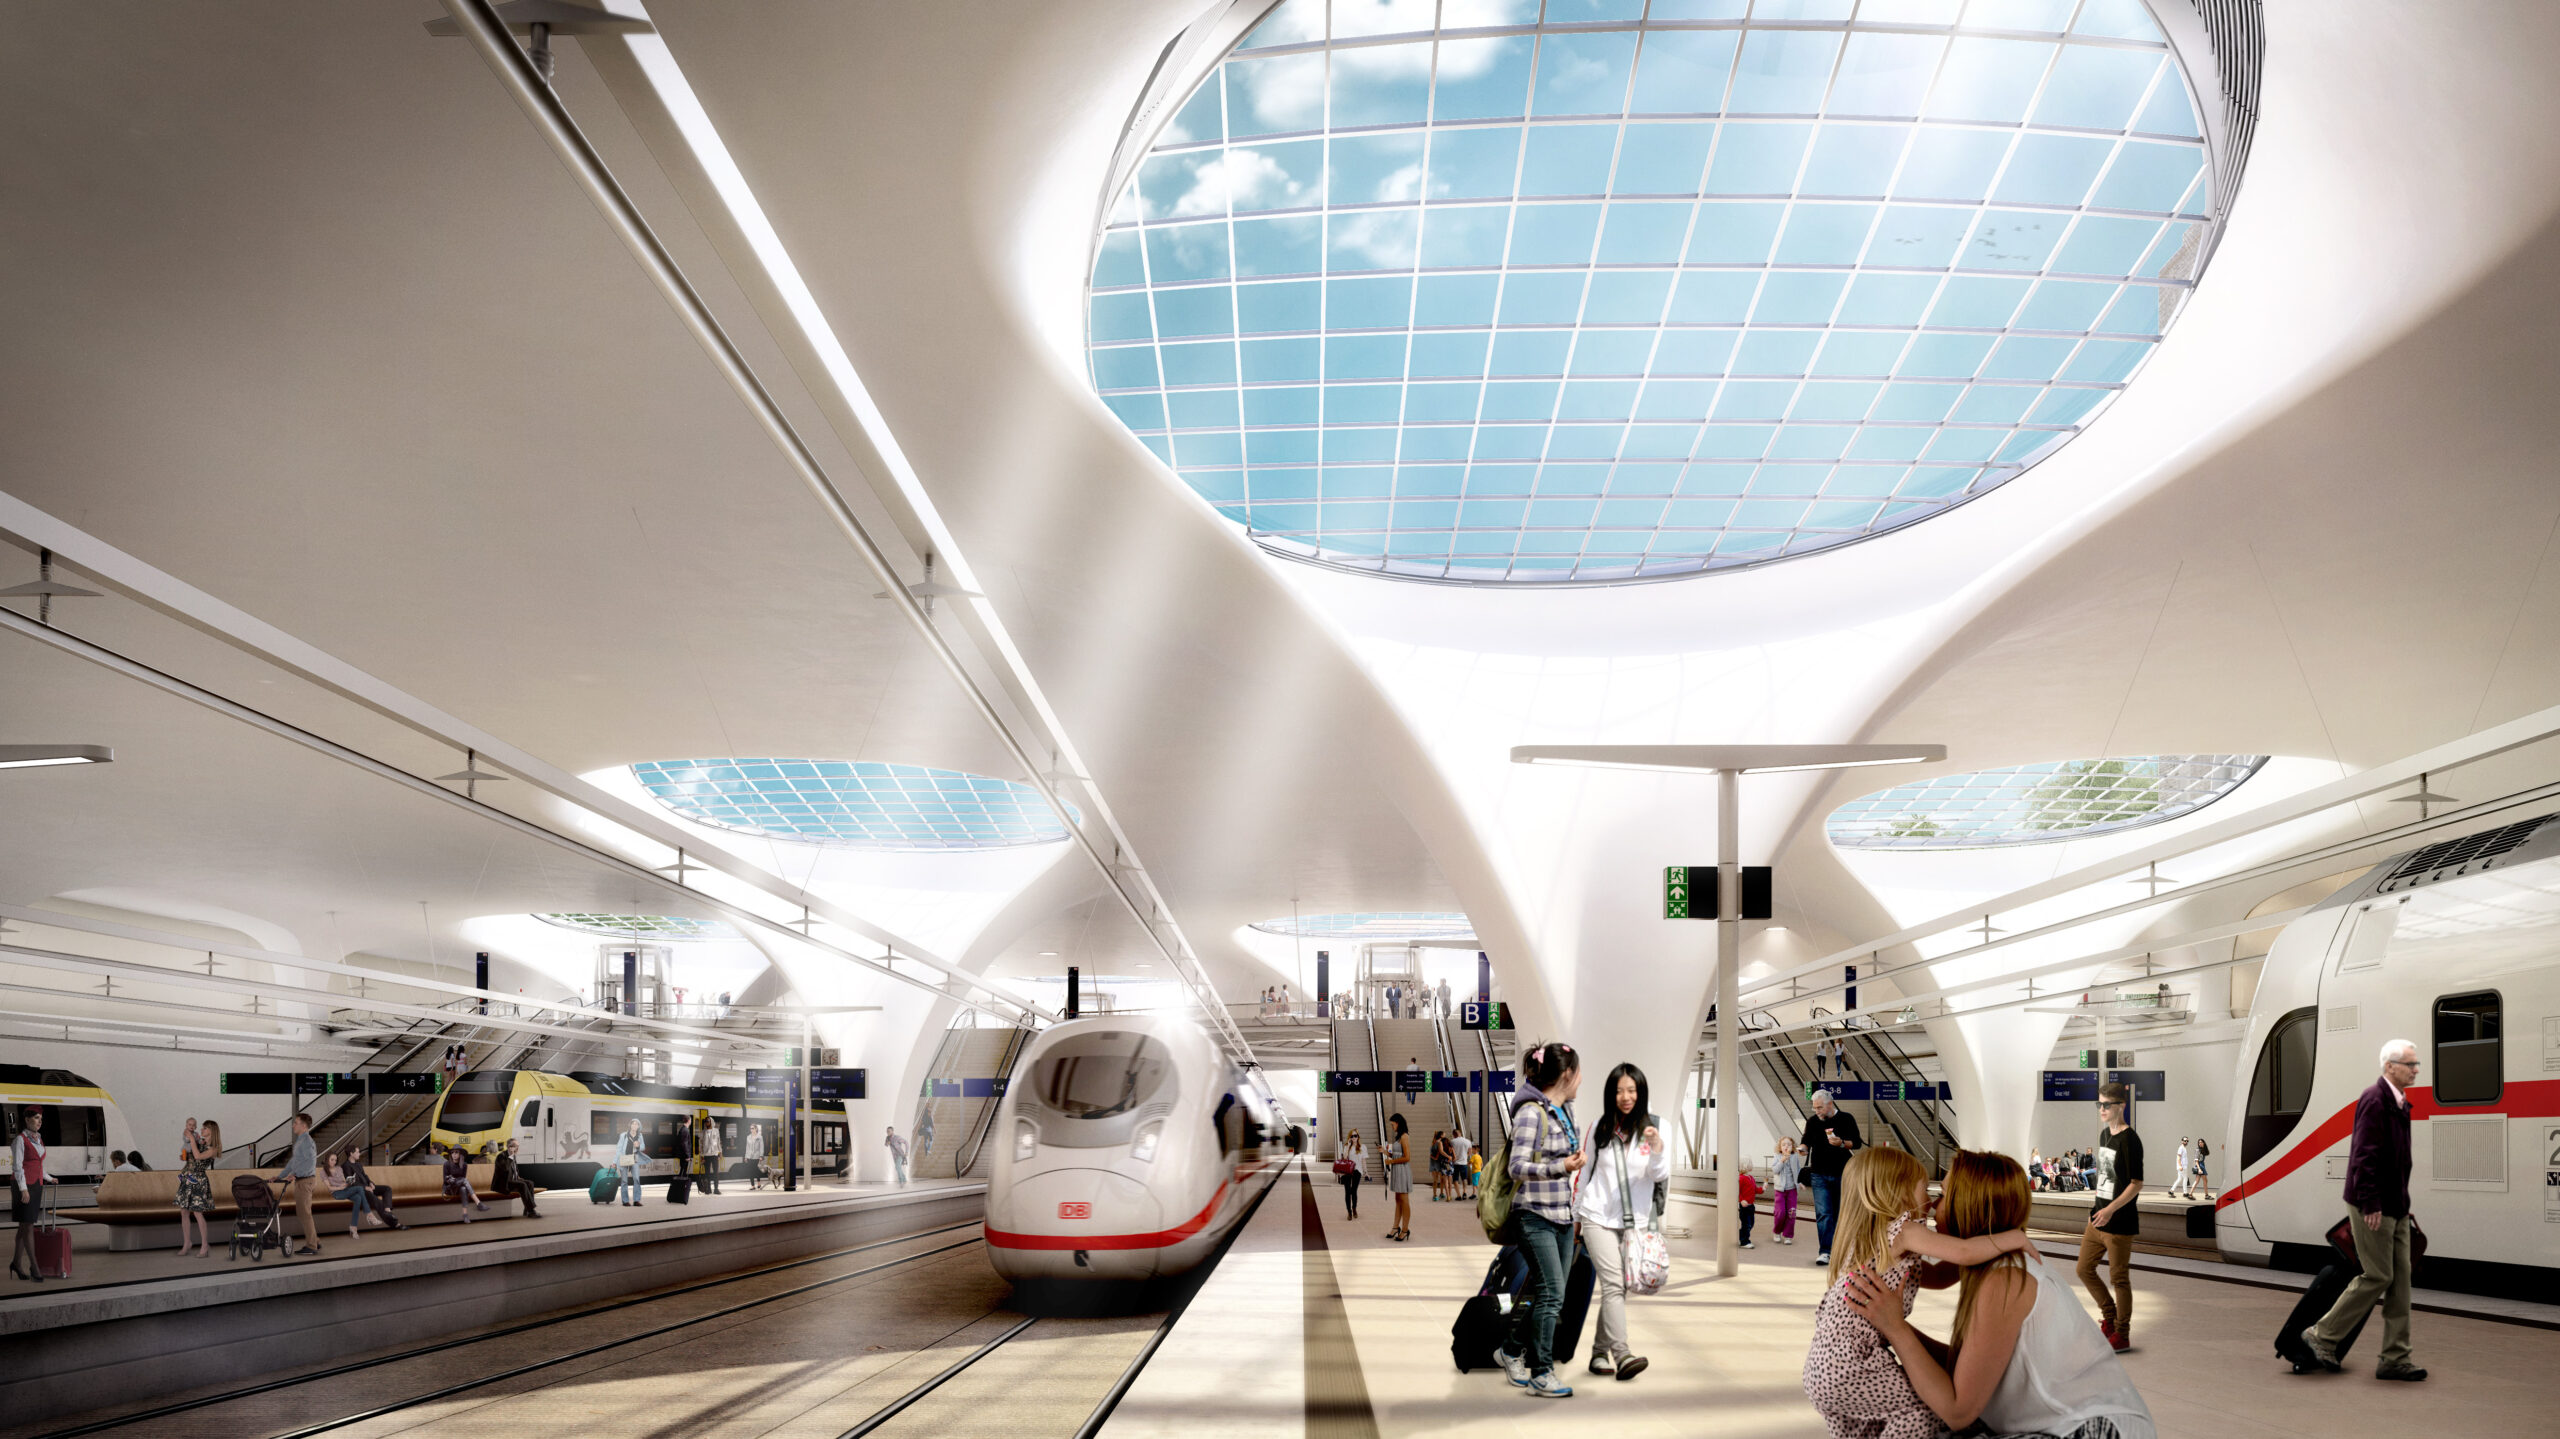 The future main station will open in December 2026